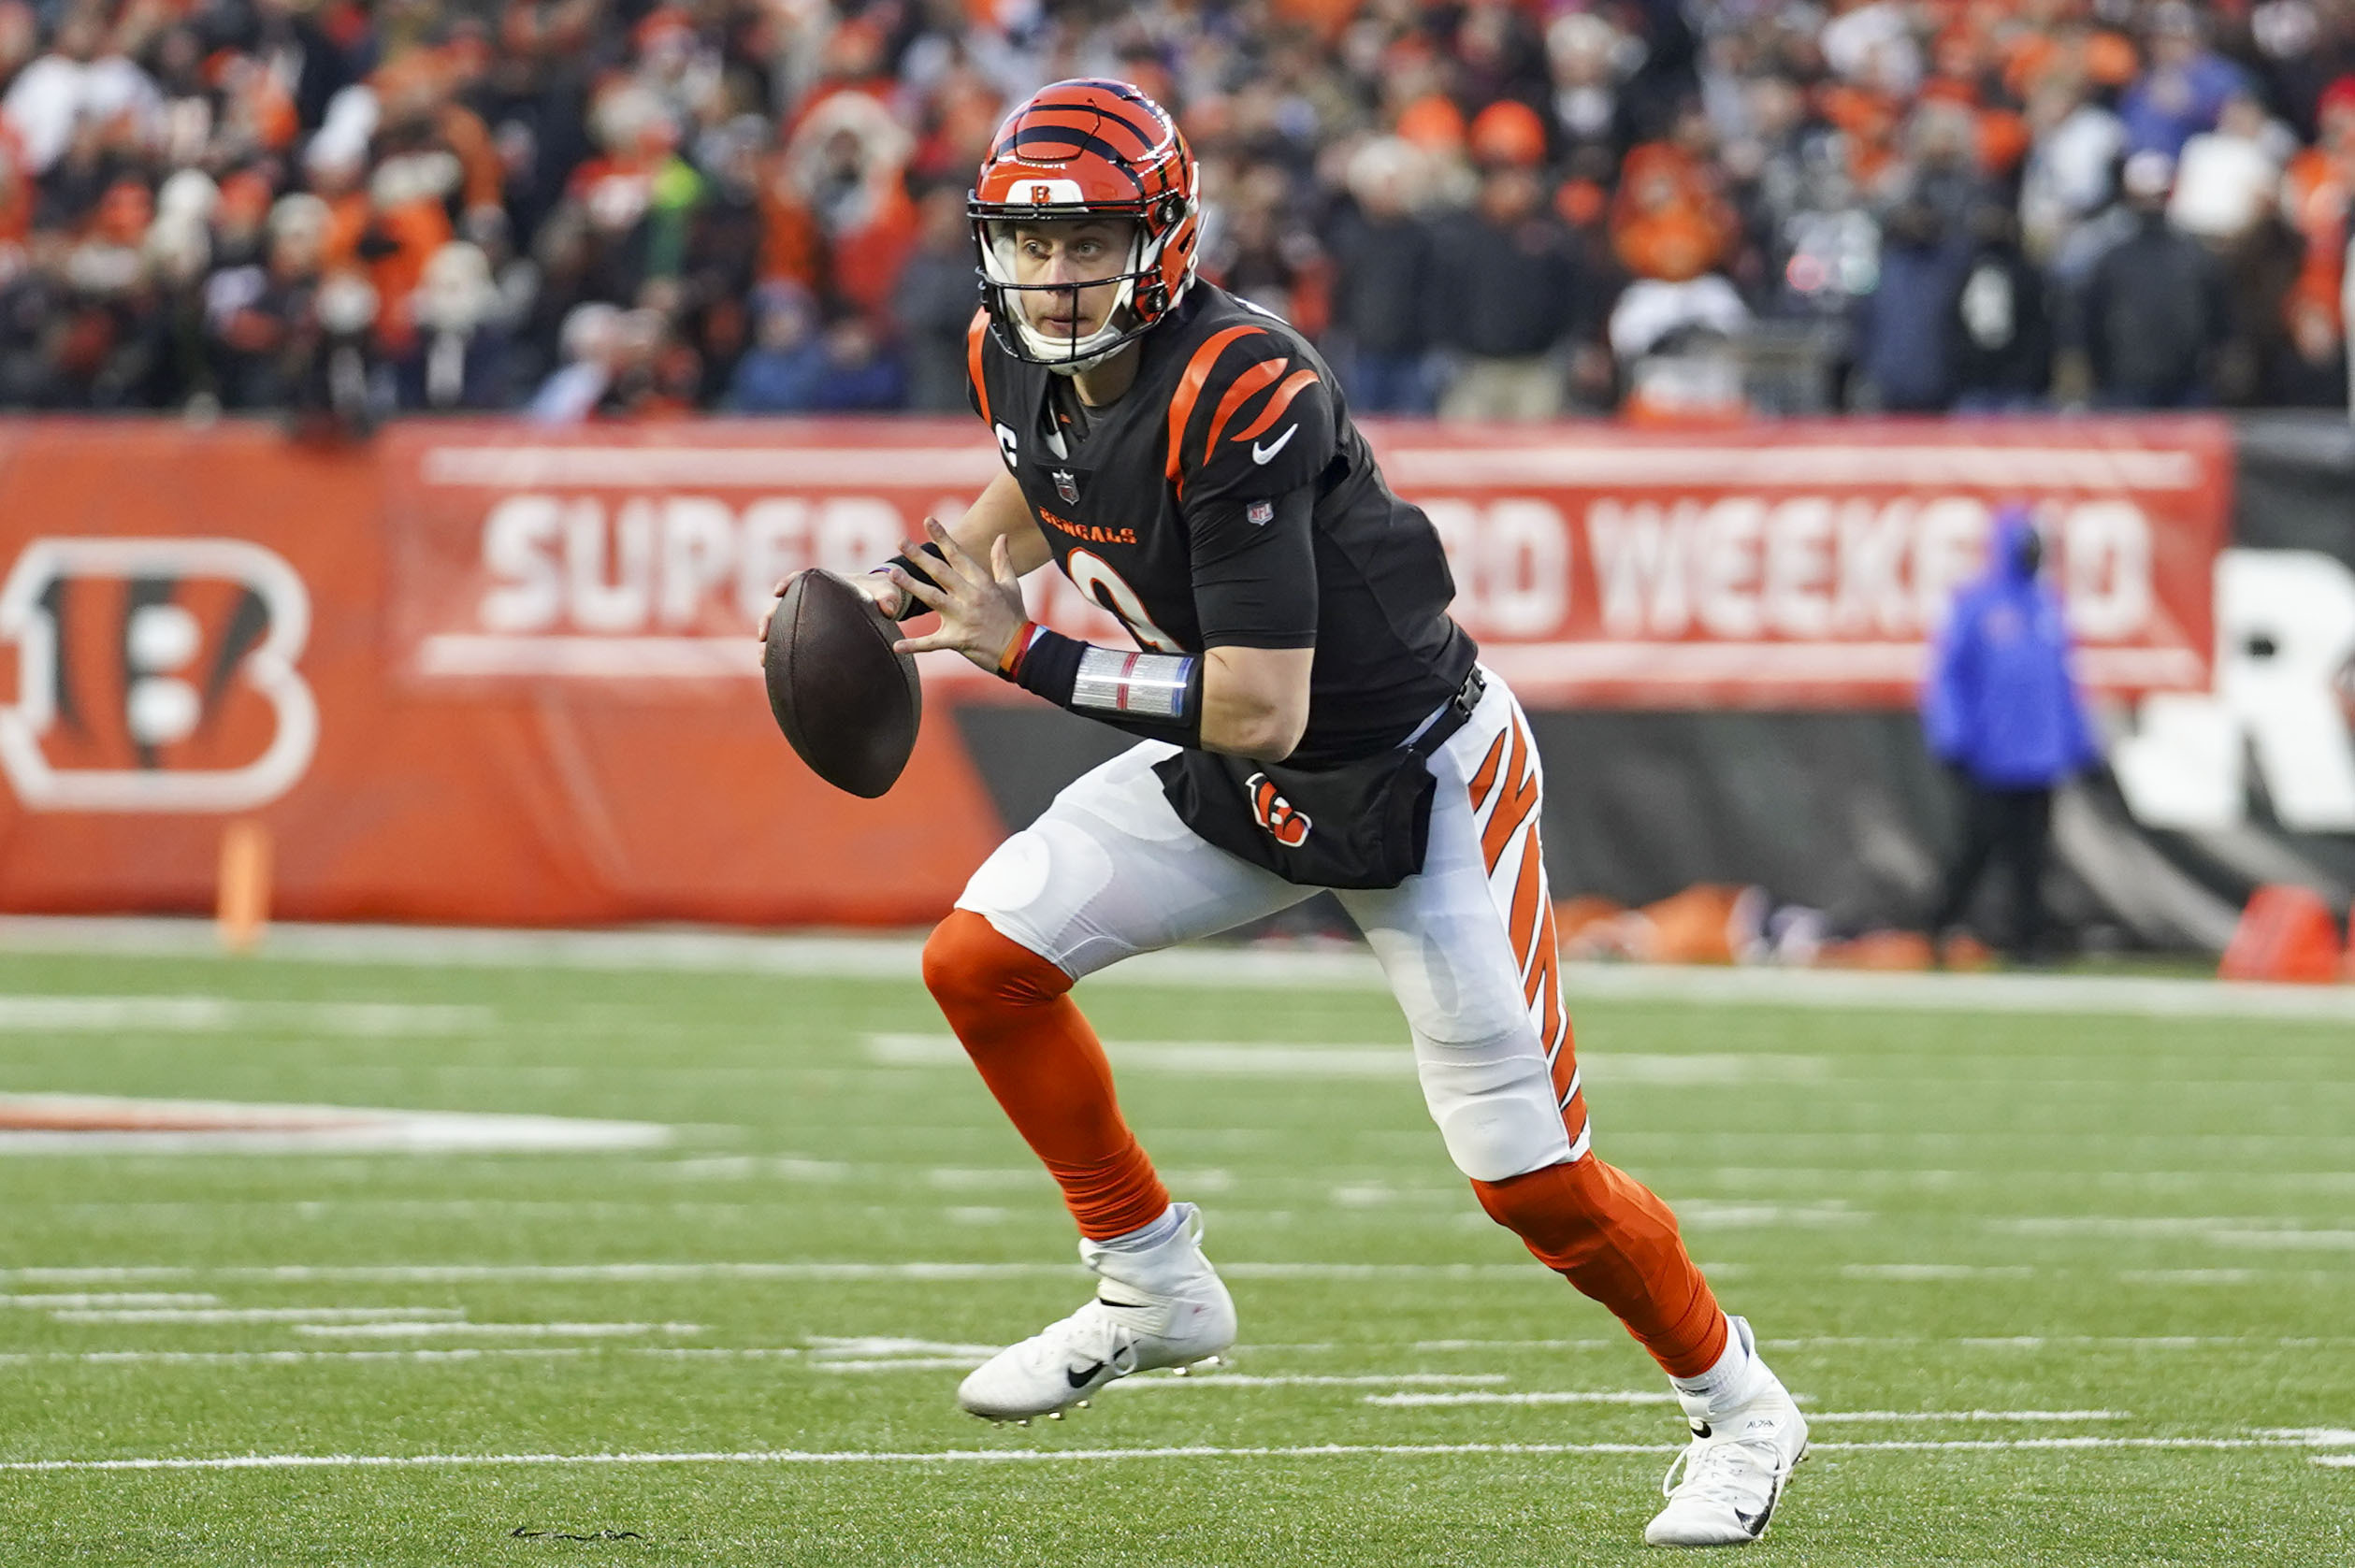 How the Bengals Beat the Titans to Advance to the AFC Championship